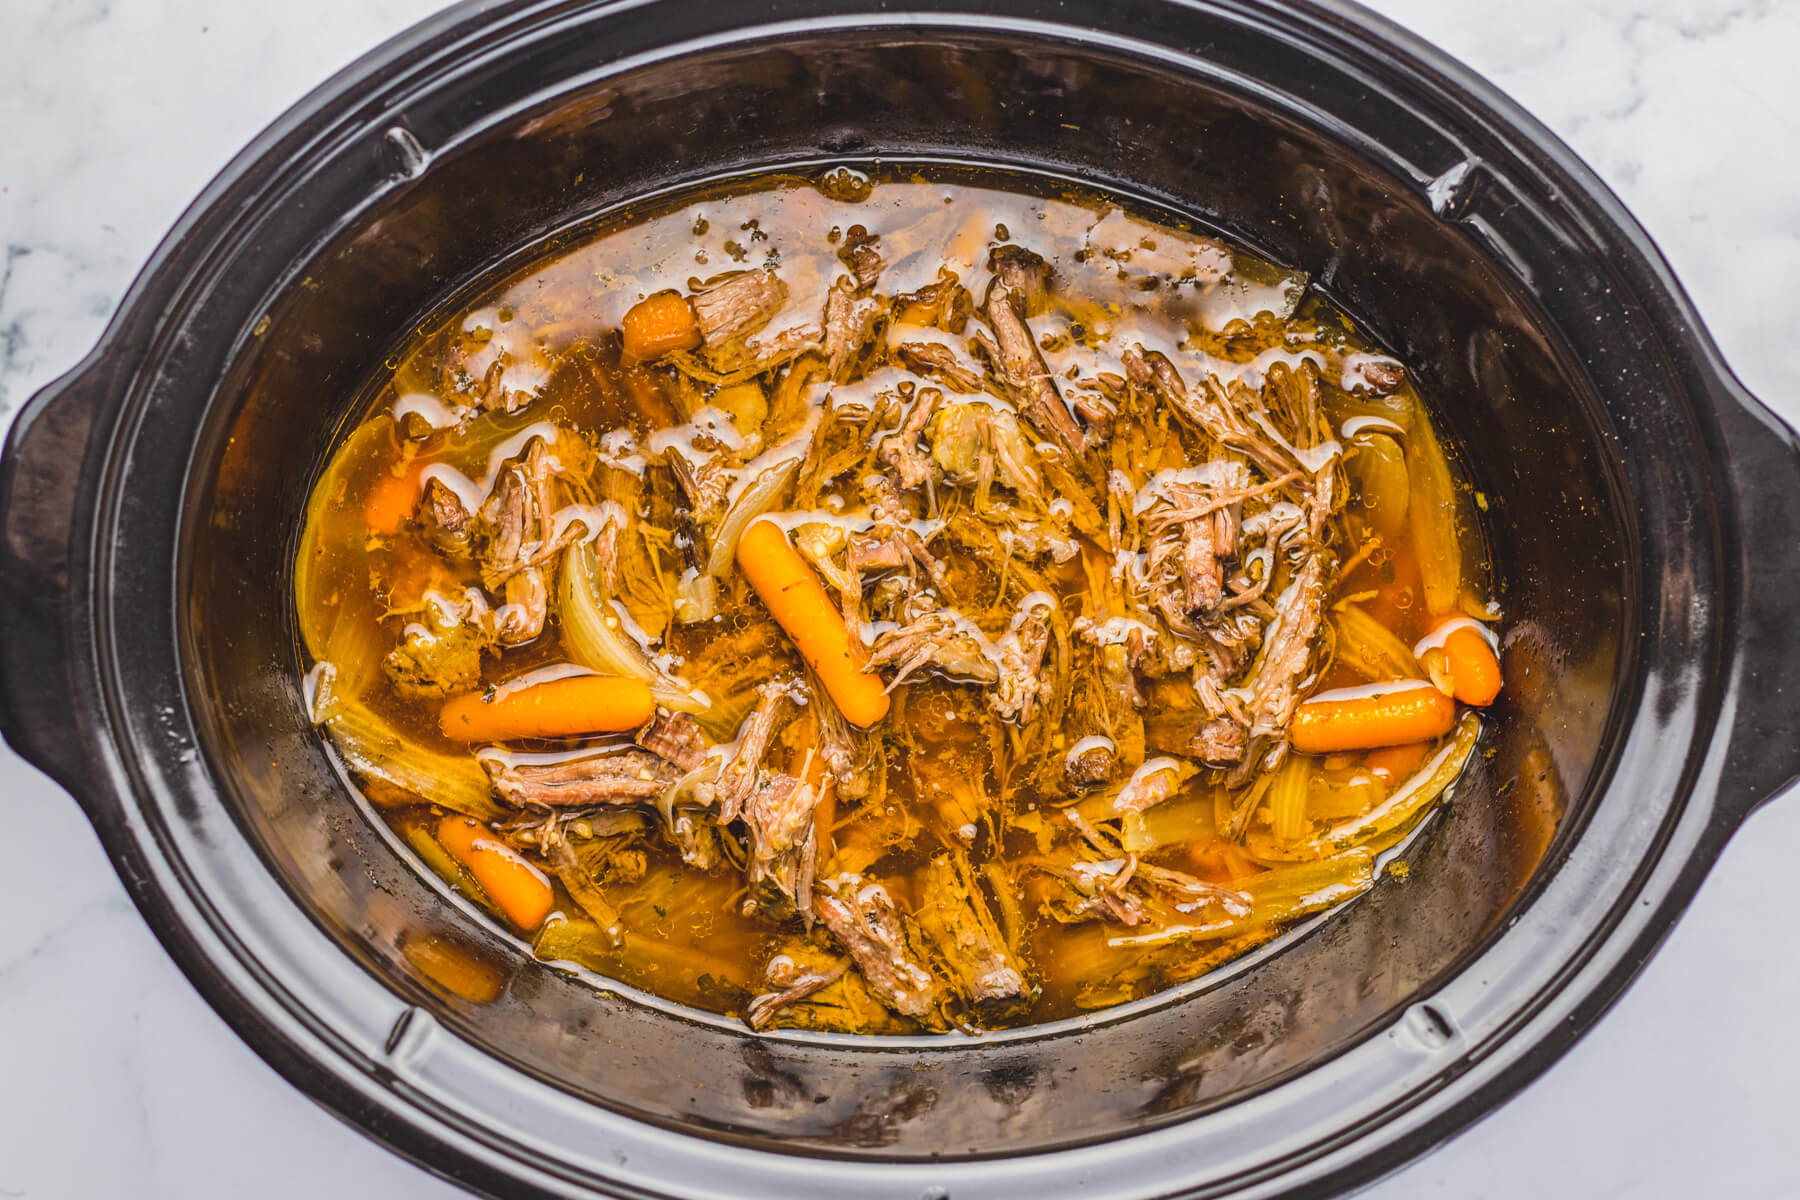 A black crock pot insert containing shredded chuck roast, carrots, and onions, in gravy.